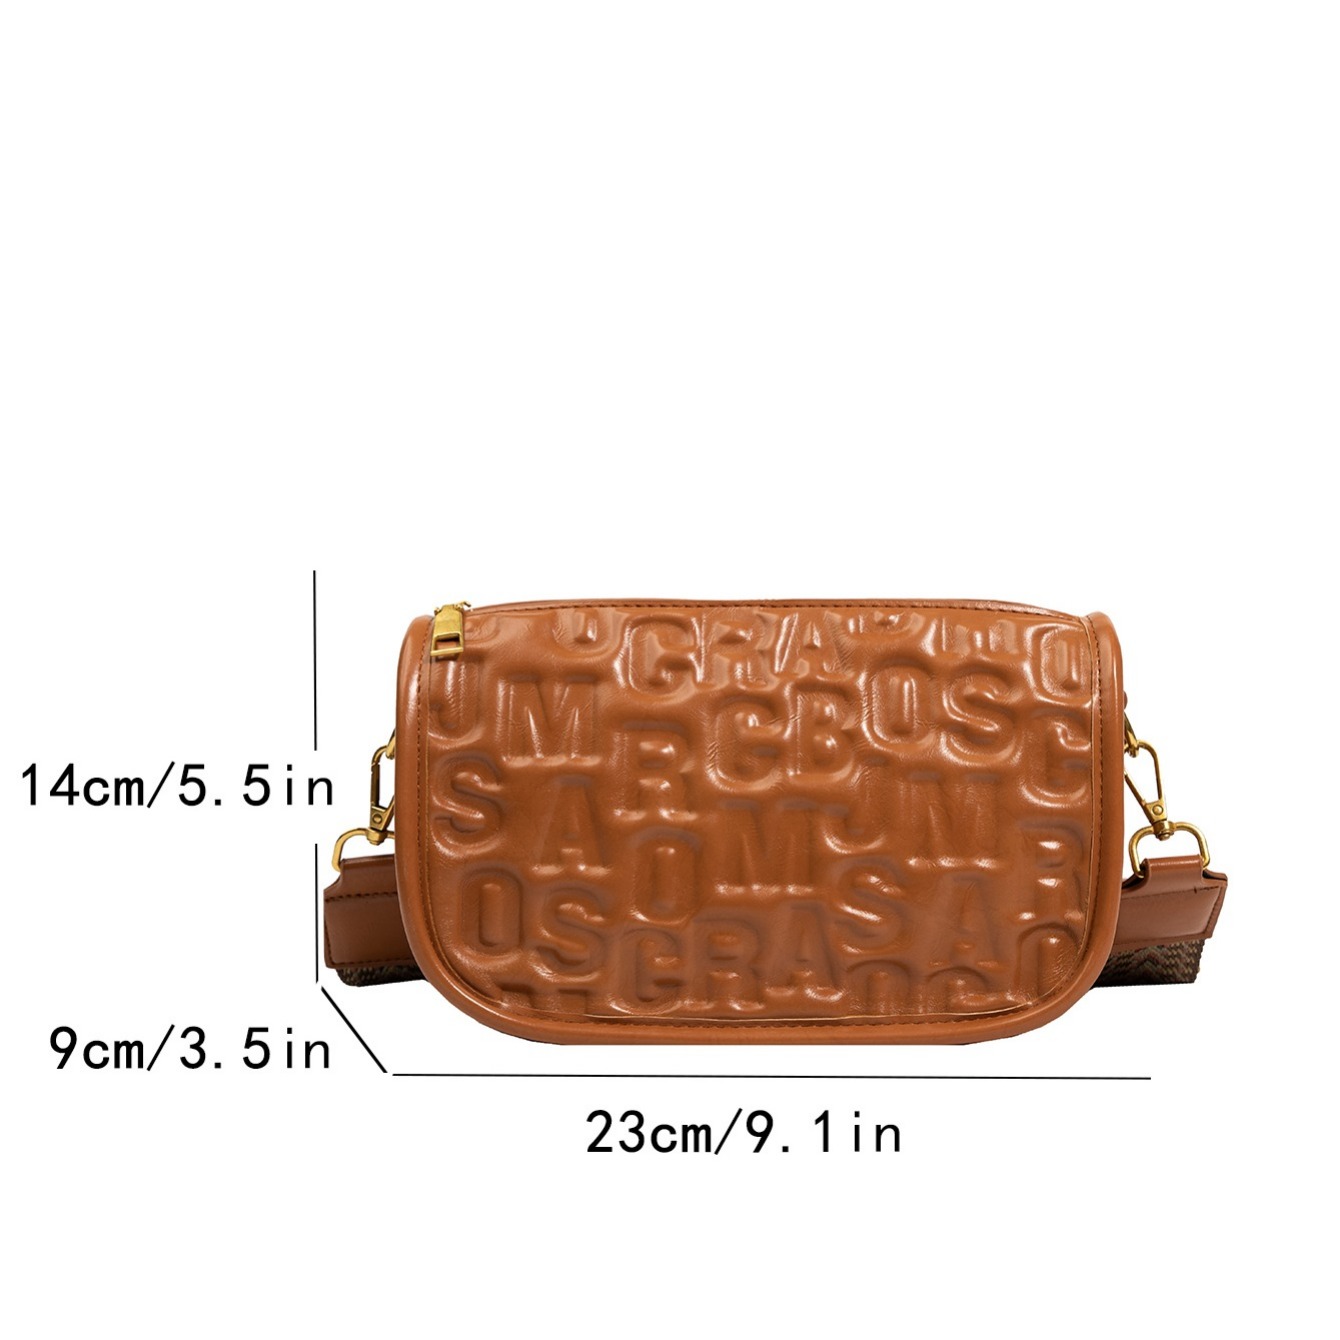 Bright Embossed Crossbody Bag Fashion Flap Shoulder Bag Zipper Bag For Work  With Wide Strap, Save More With Clearance Deals